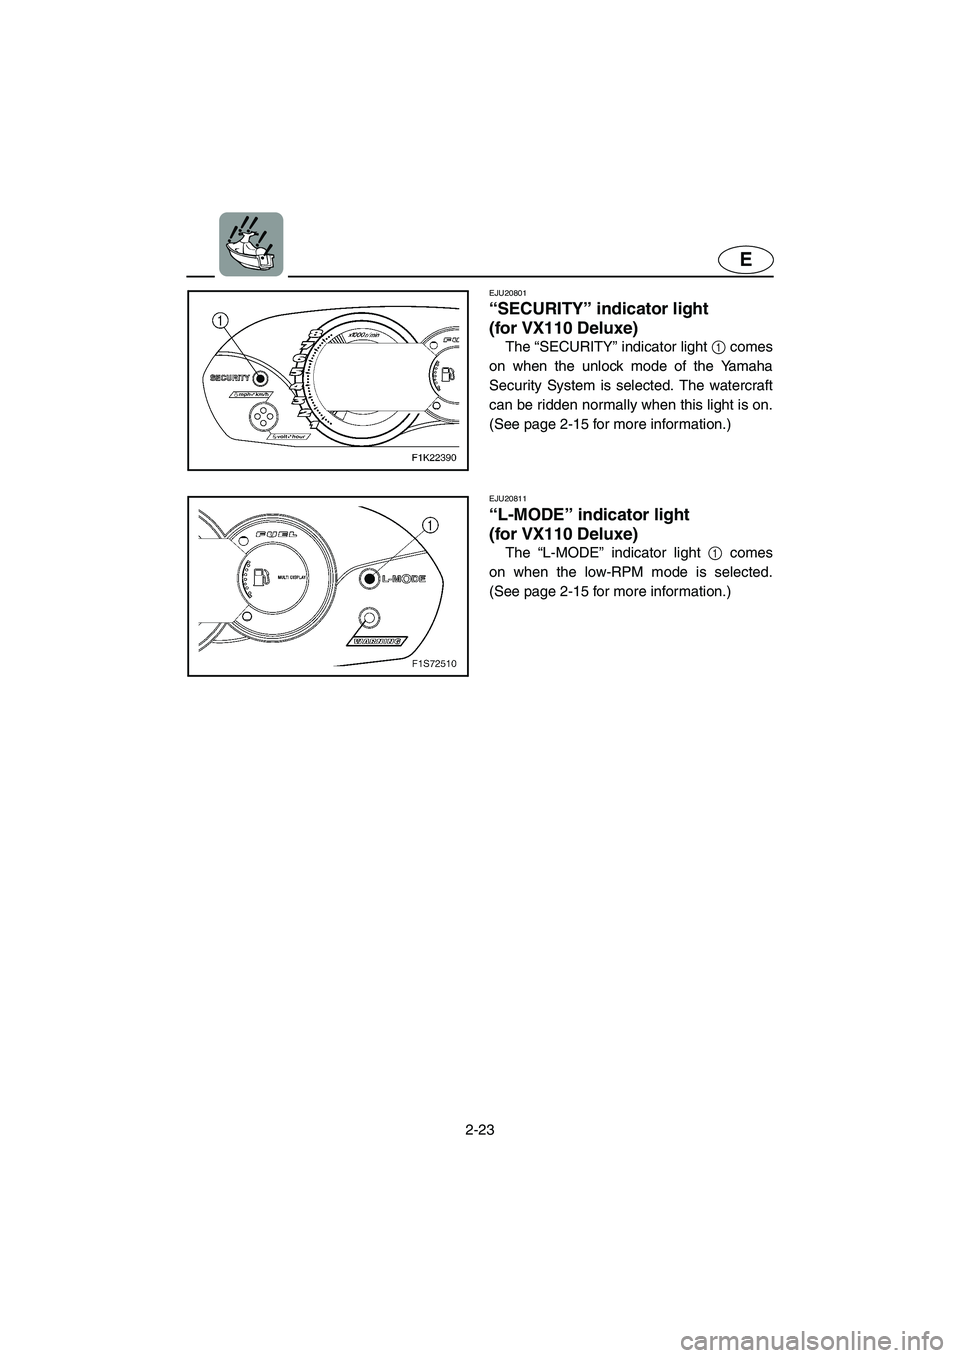 YAMAHA VX CRUISER 2006  Owners Manual 2-23
E
EJU20801 
“SECURITY” indicator light 
(for VX110 Deluxe) 
The “SECURITY” indicator light 1 comes
on when the unlock mode of the Yamaha
Security System is selected. The watercraft
can be